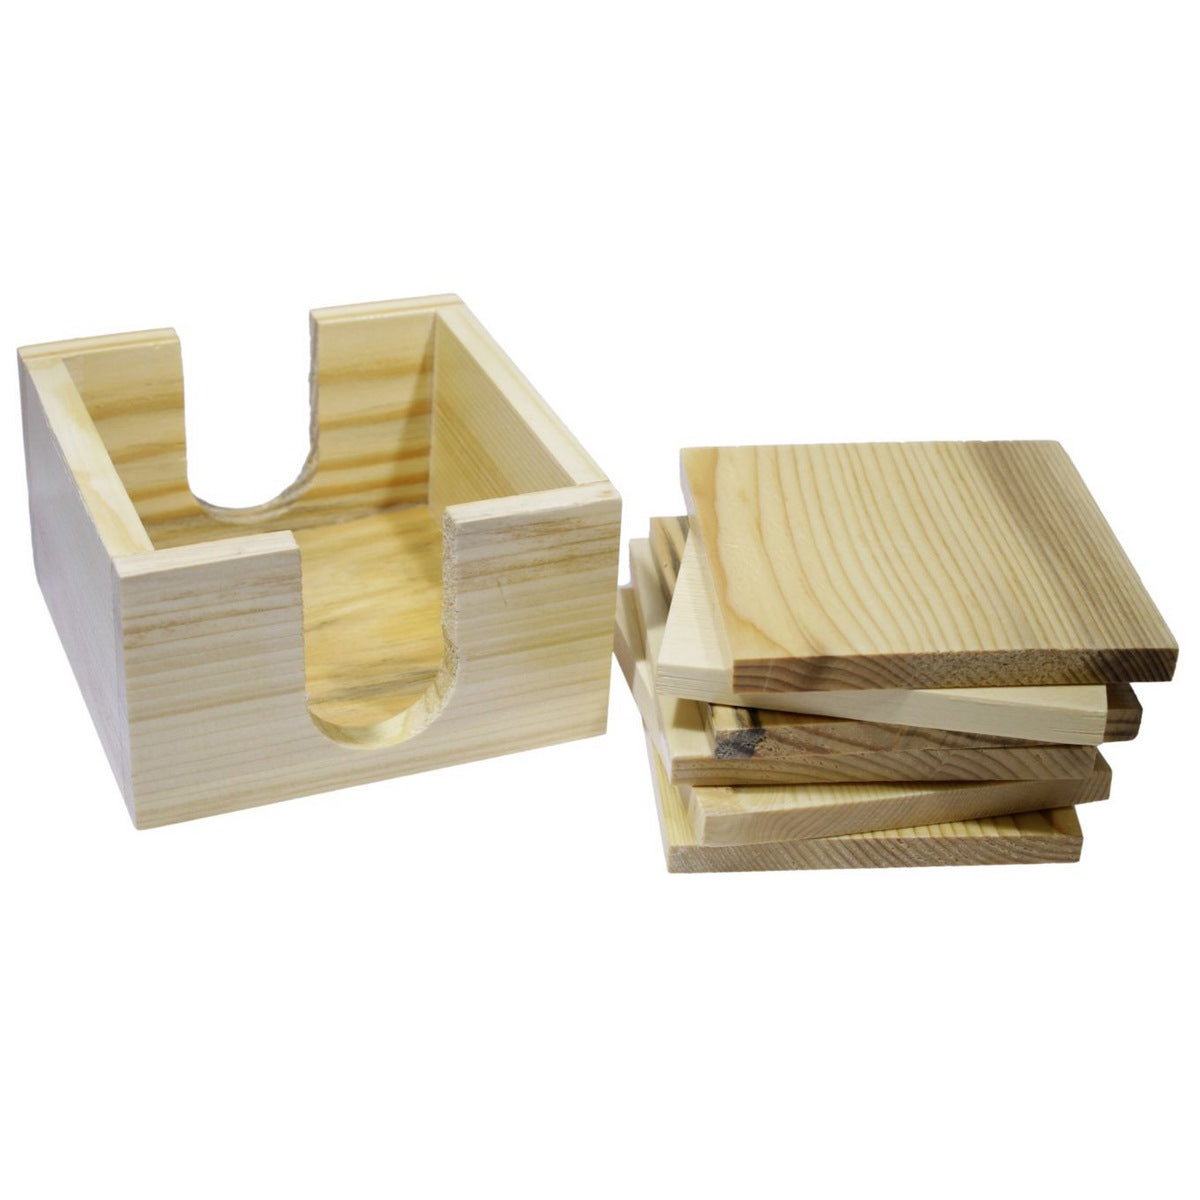 Set of 6 Square Wooden Tea Coaster - For Corporate Gifting, Office Use, Personal Use, Return Gift JATC105B